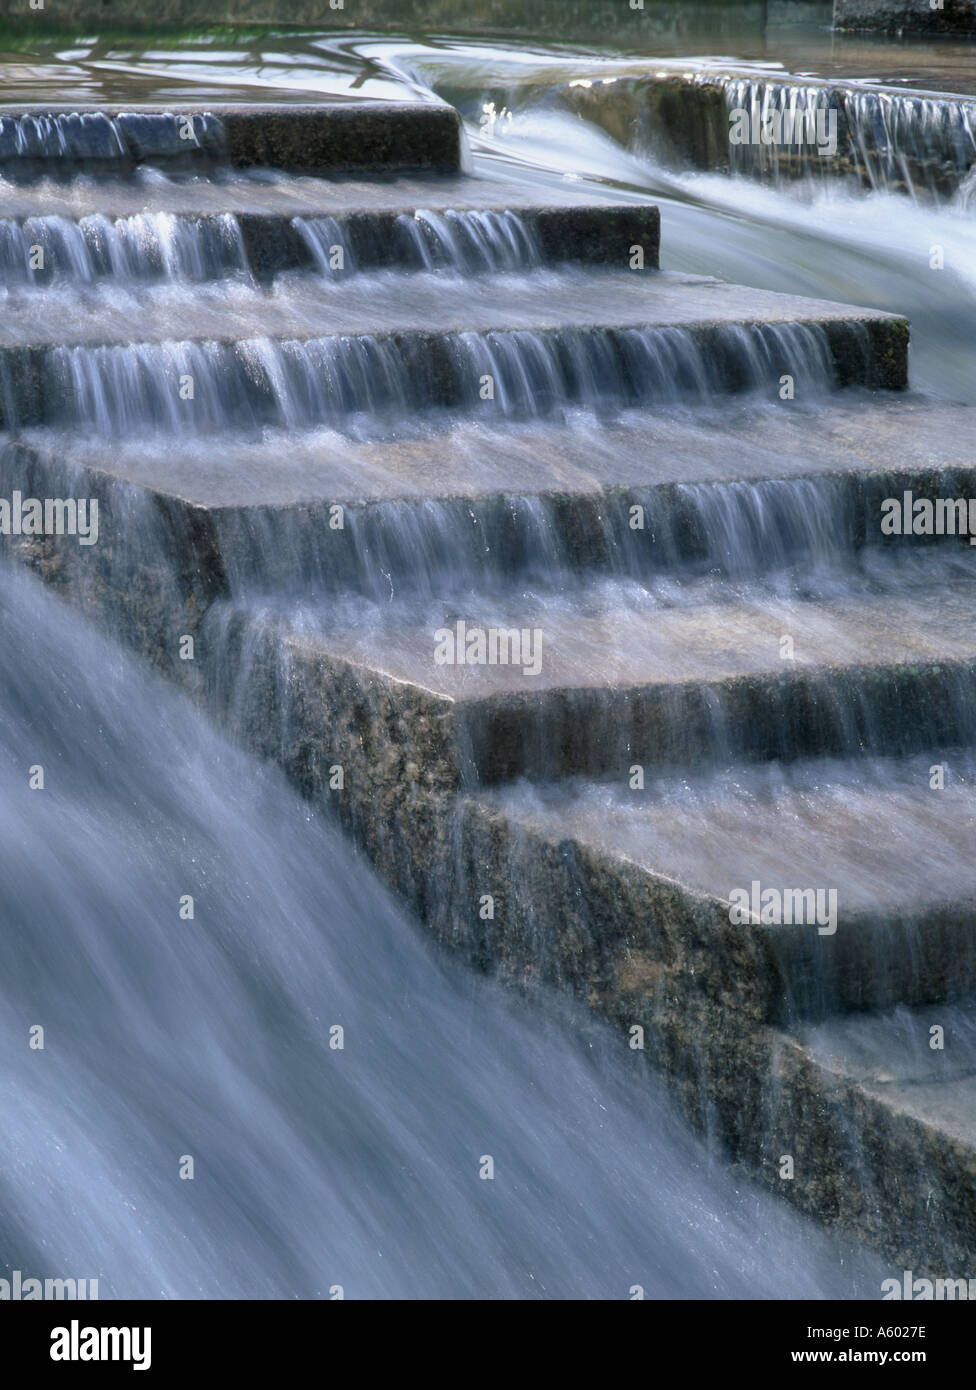 Water flowing over steps of stone Stock Photo